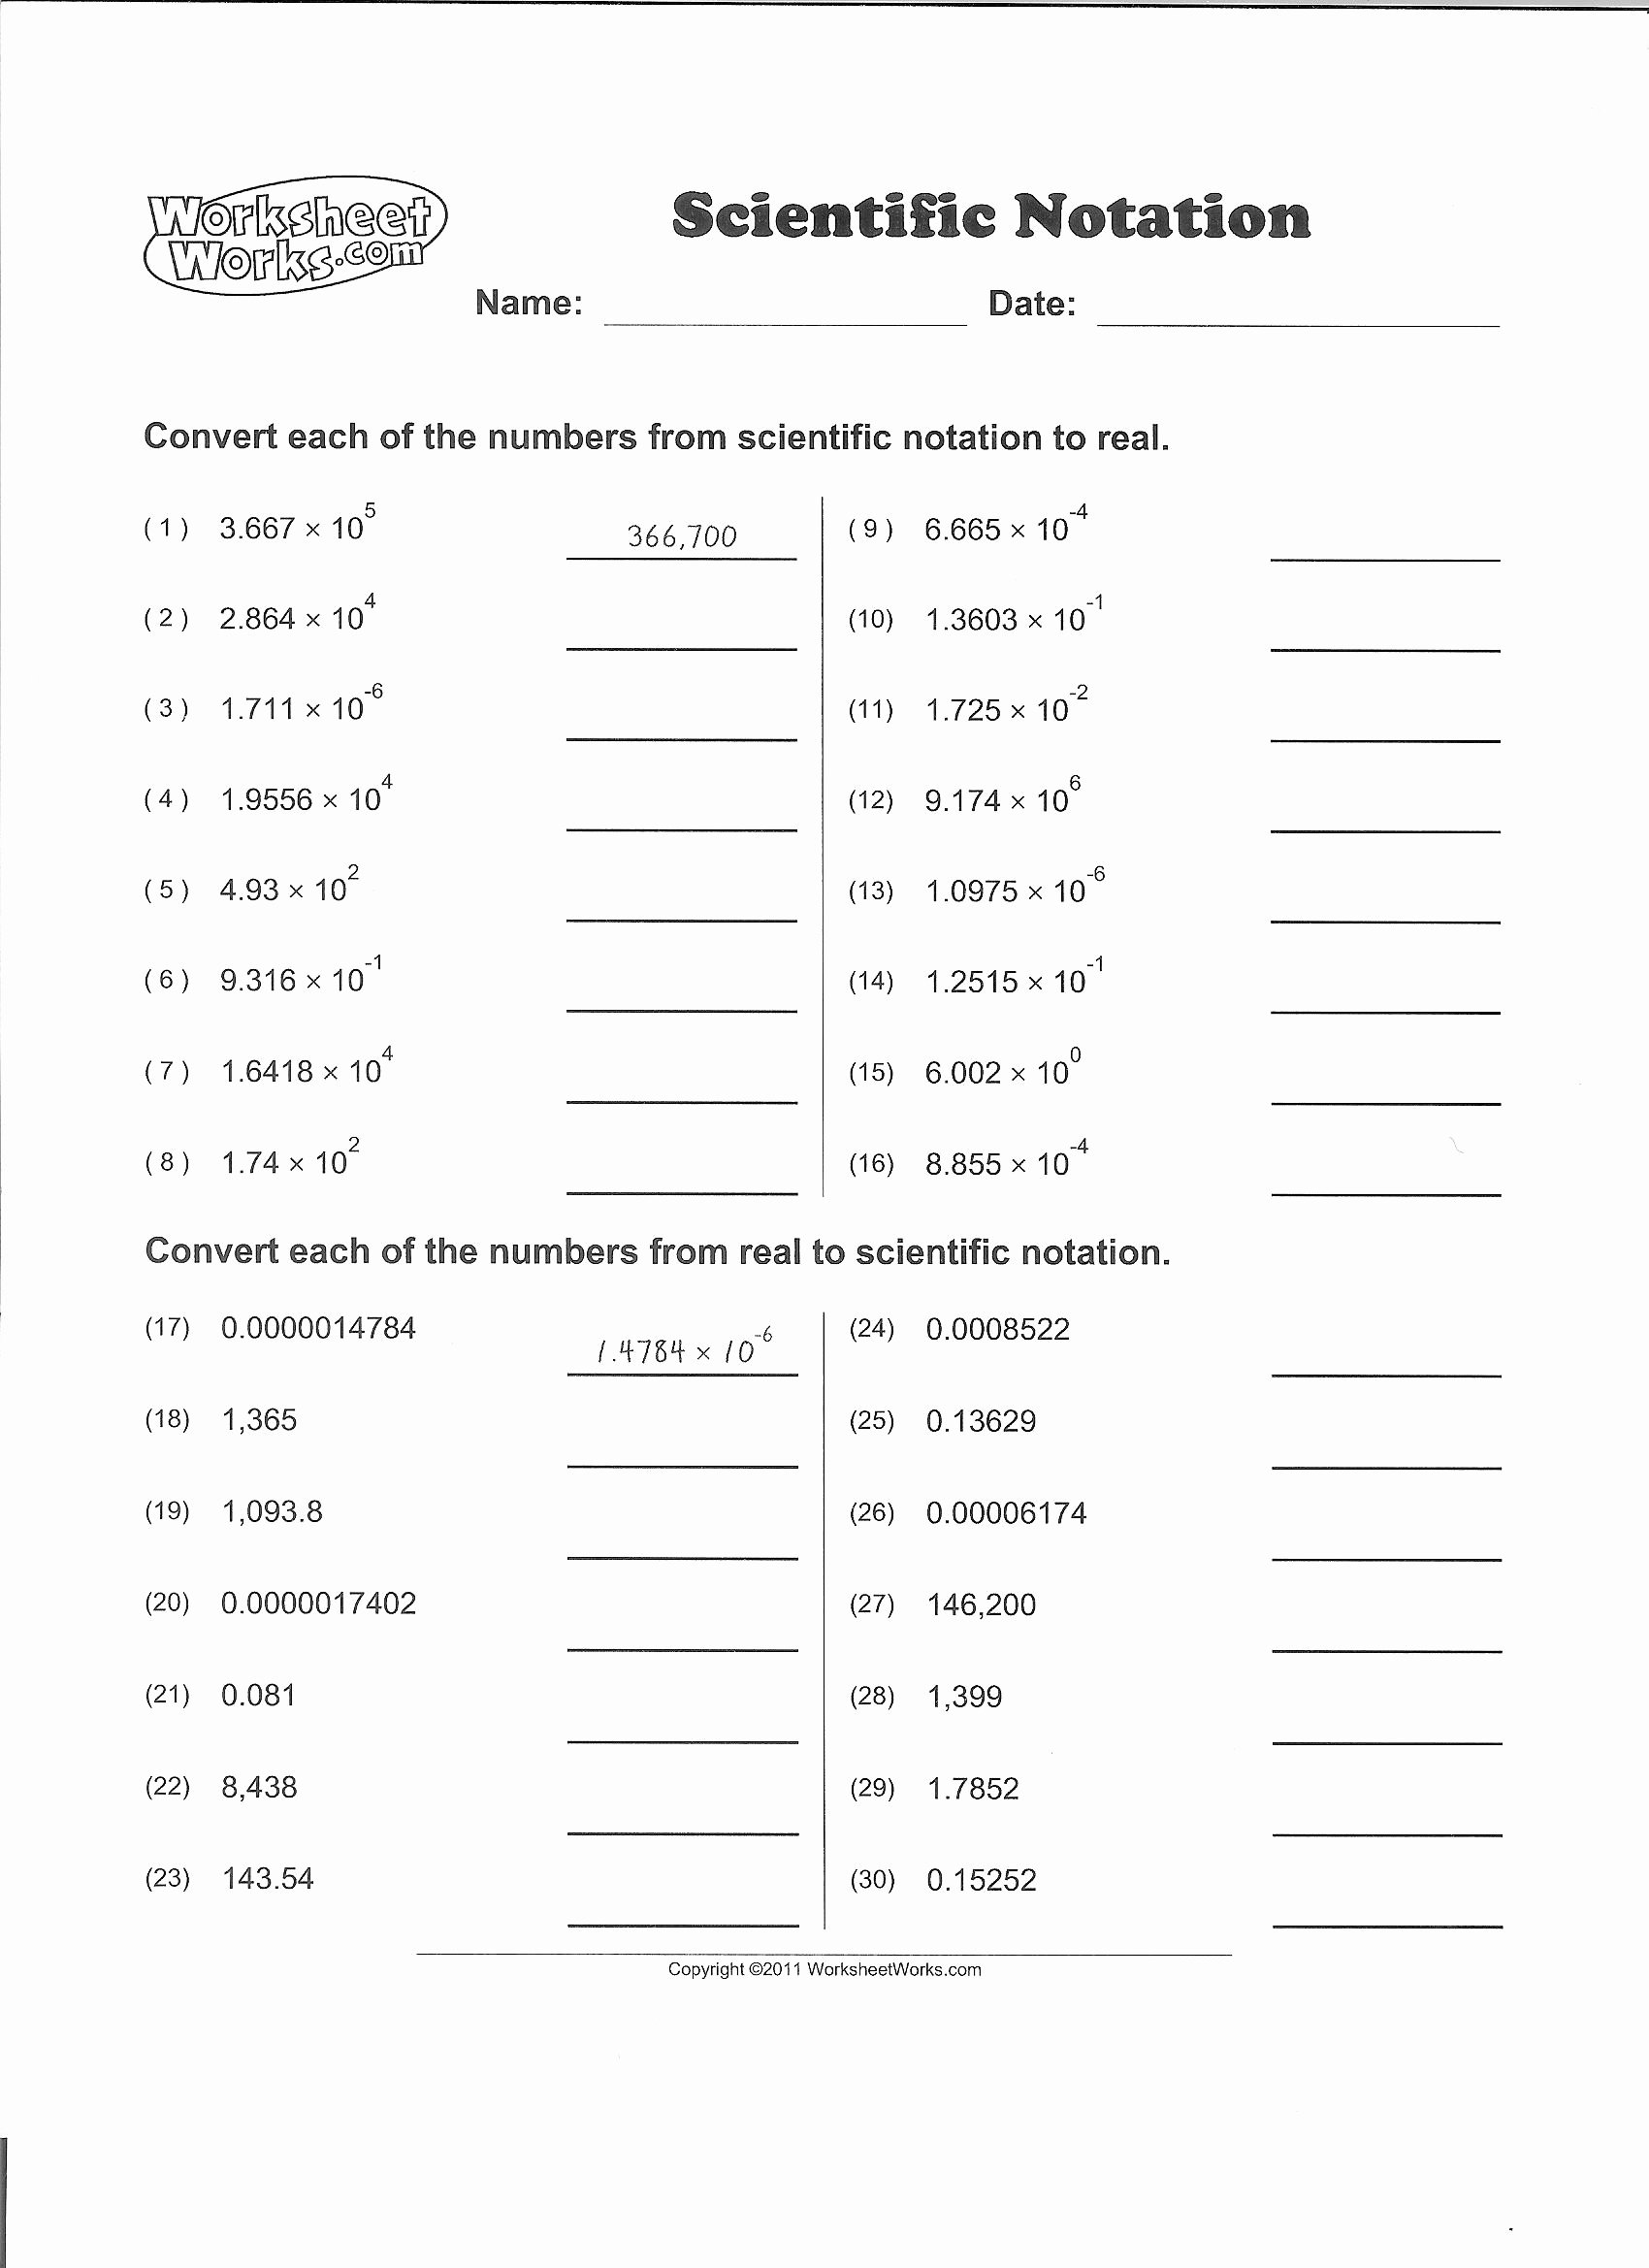 Scientific Notation Worksheet Chemistry Best Of Heritage High Teachers Courses and Files